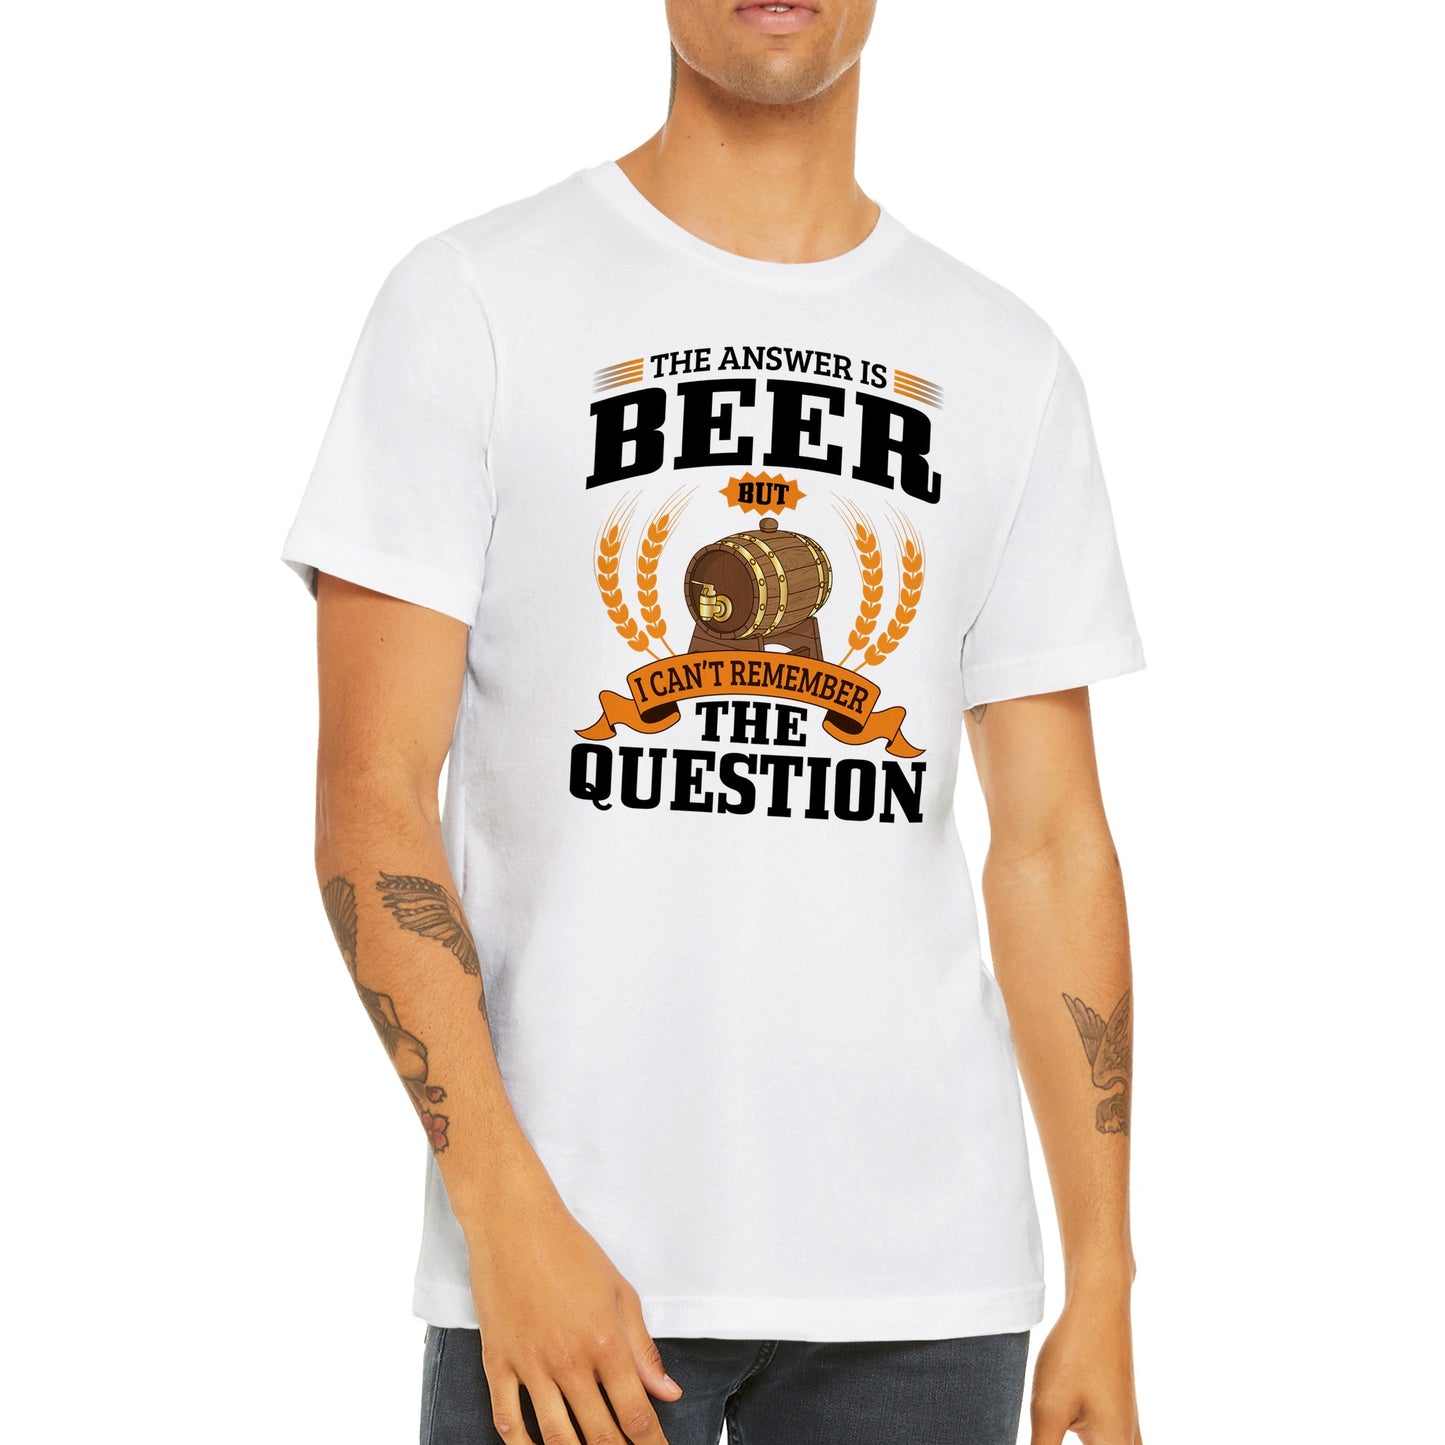 Funny T-shirts - The Answer is Beer But - Premium Unisex T-shirt 